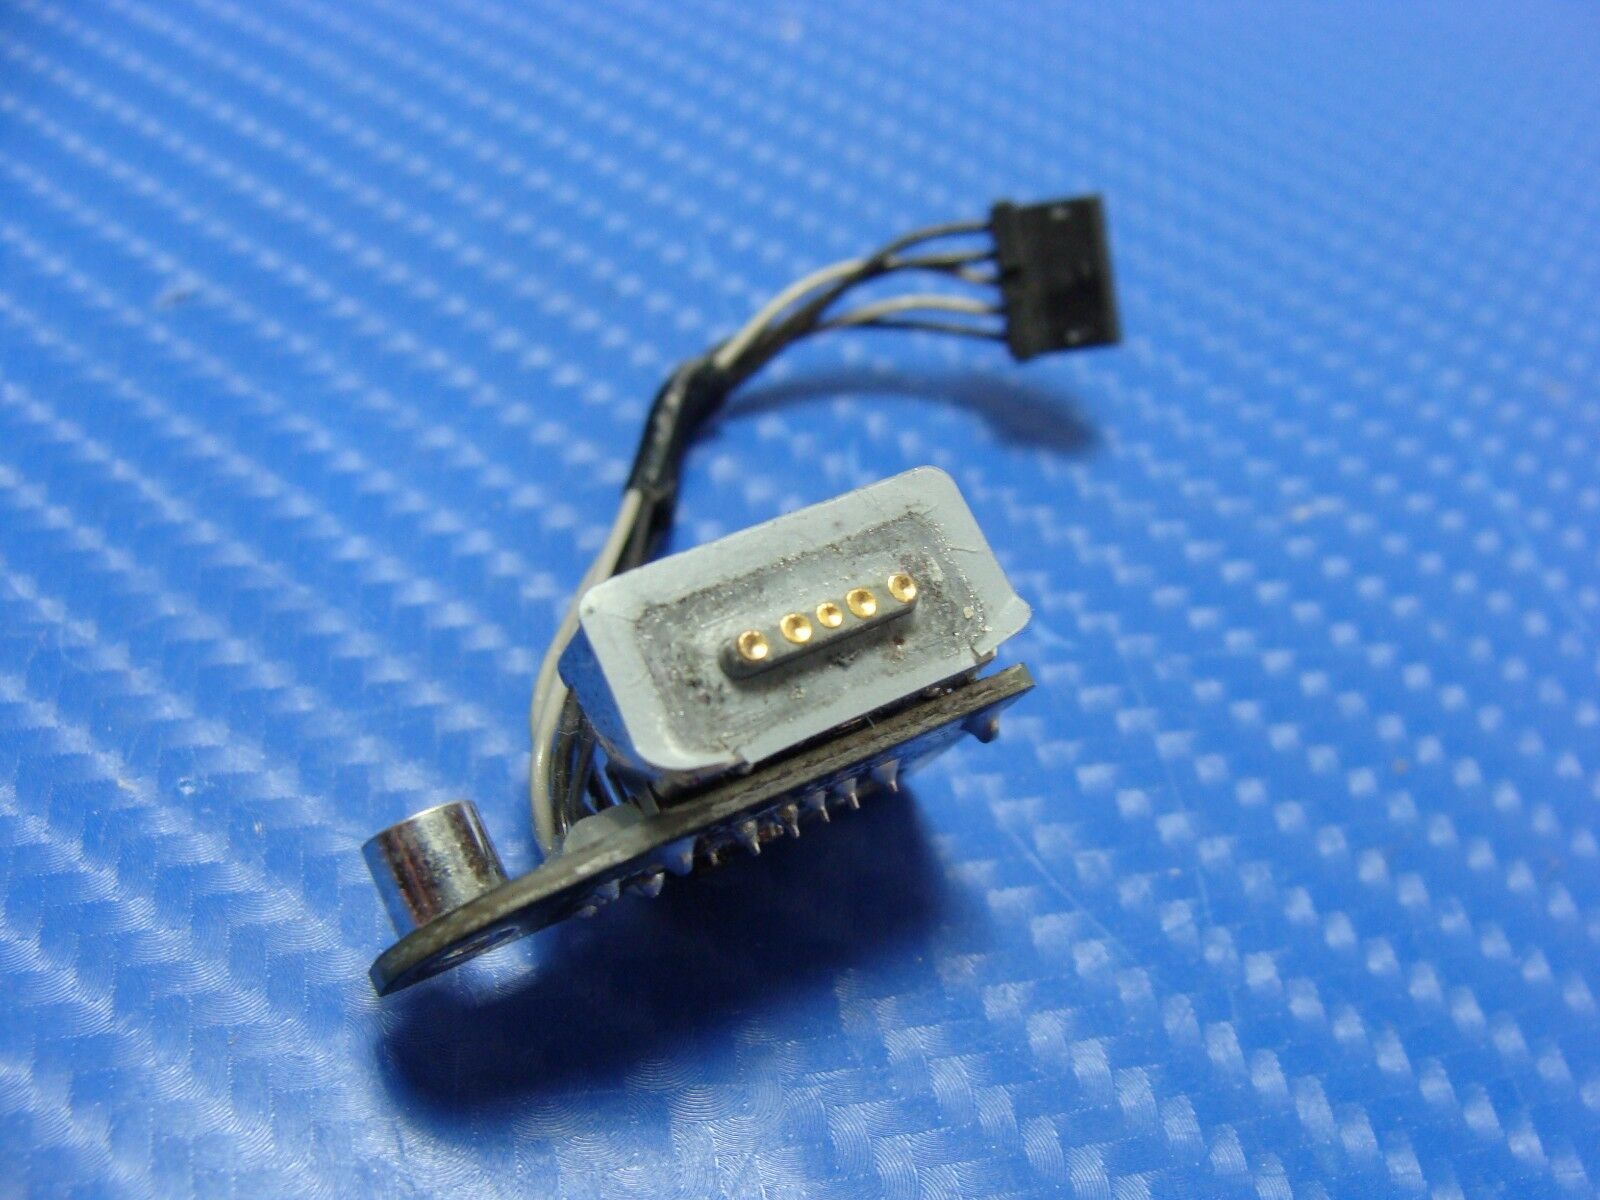 MacBook Pro A1297 MB604LL/A Early 2009 17" Genuine Laptop Magsafe Board 661-4950 Apple